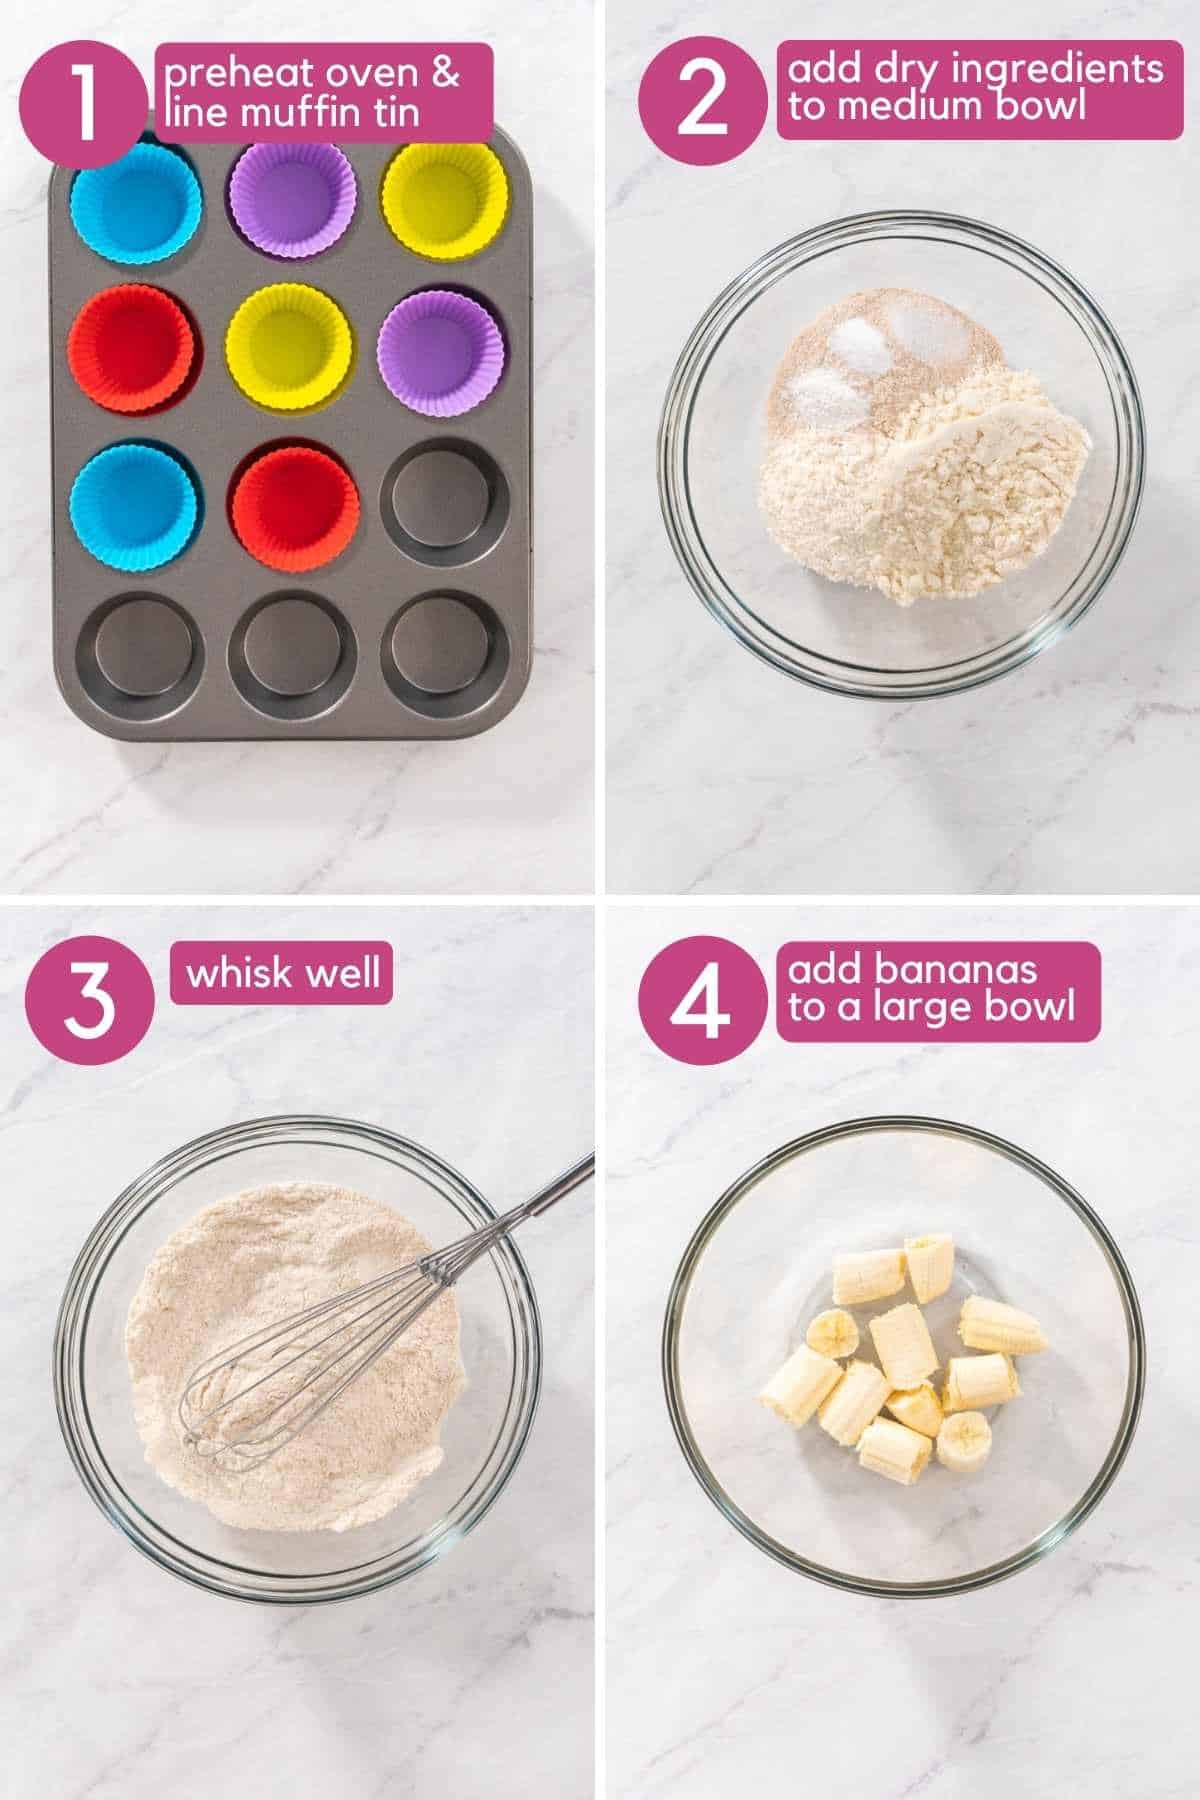 line muffin tin, add flours to bowl, and mash bananas for protein banana muffins.